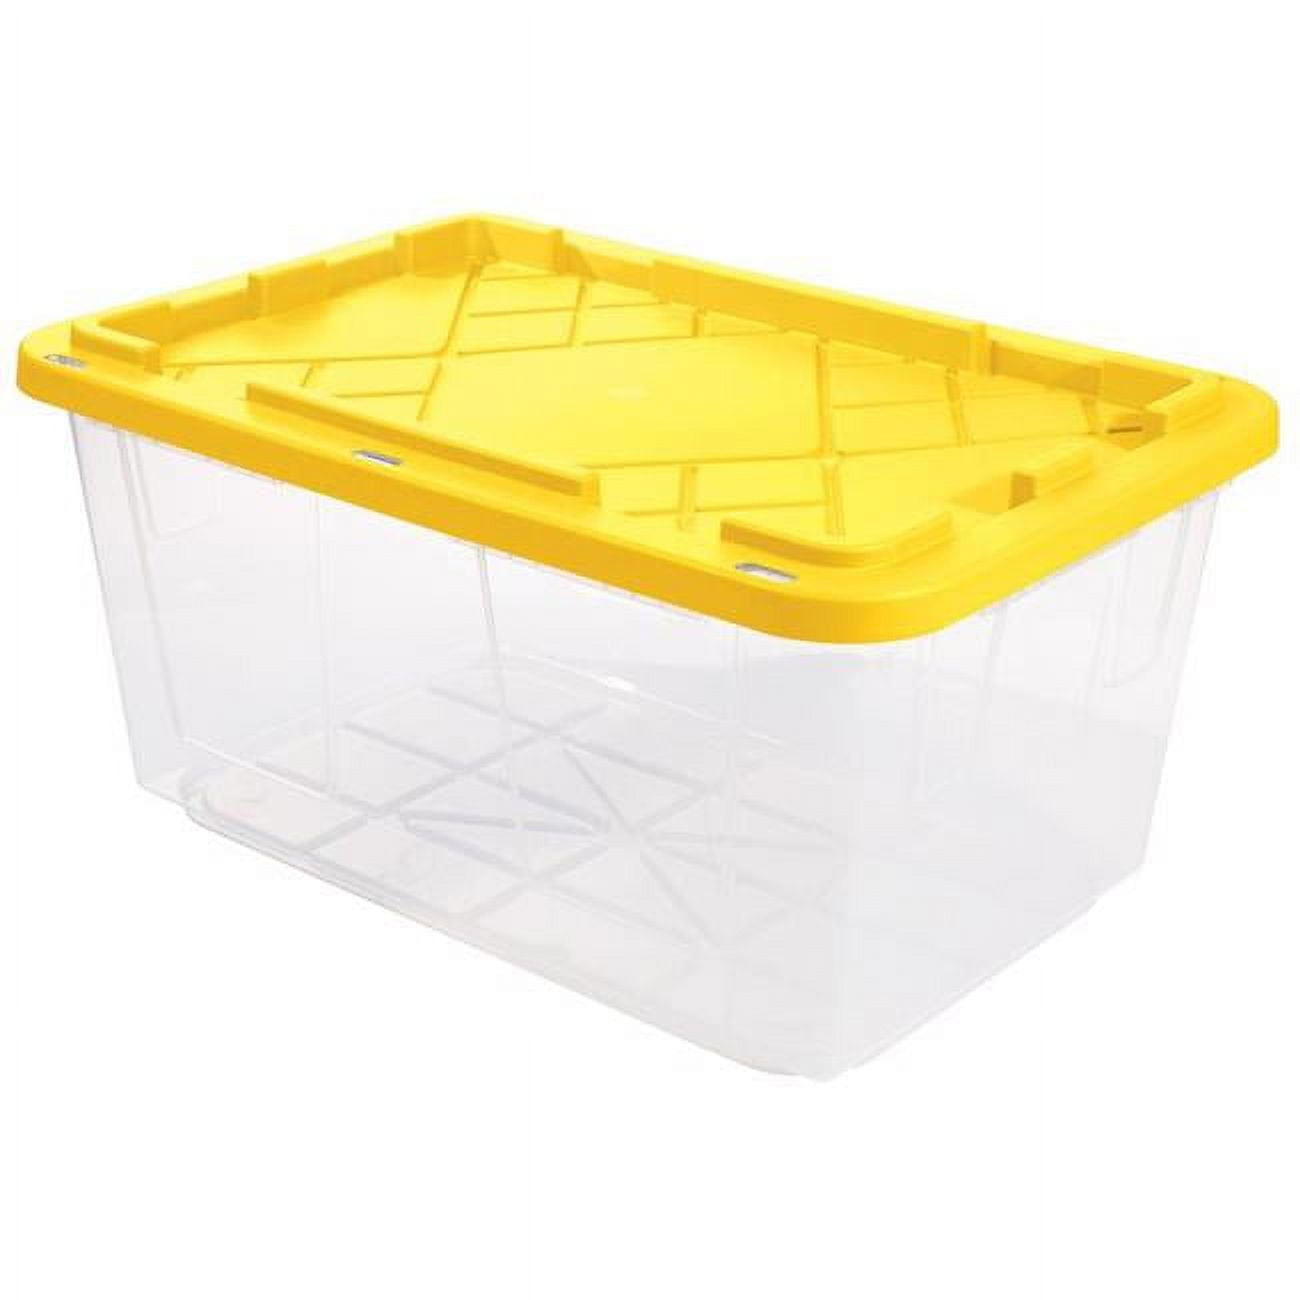 GREENMADE 27 Gallon Black & Yellow Storage Container (5-Pack)